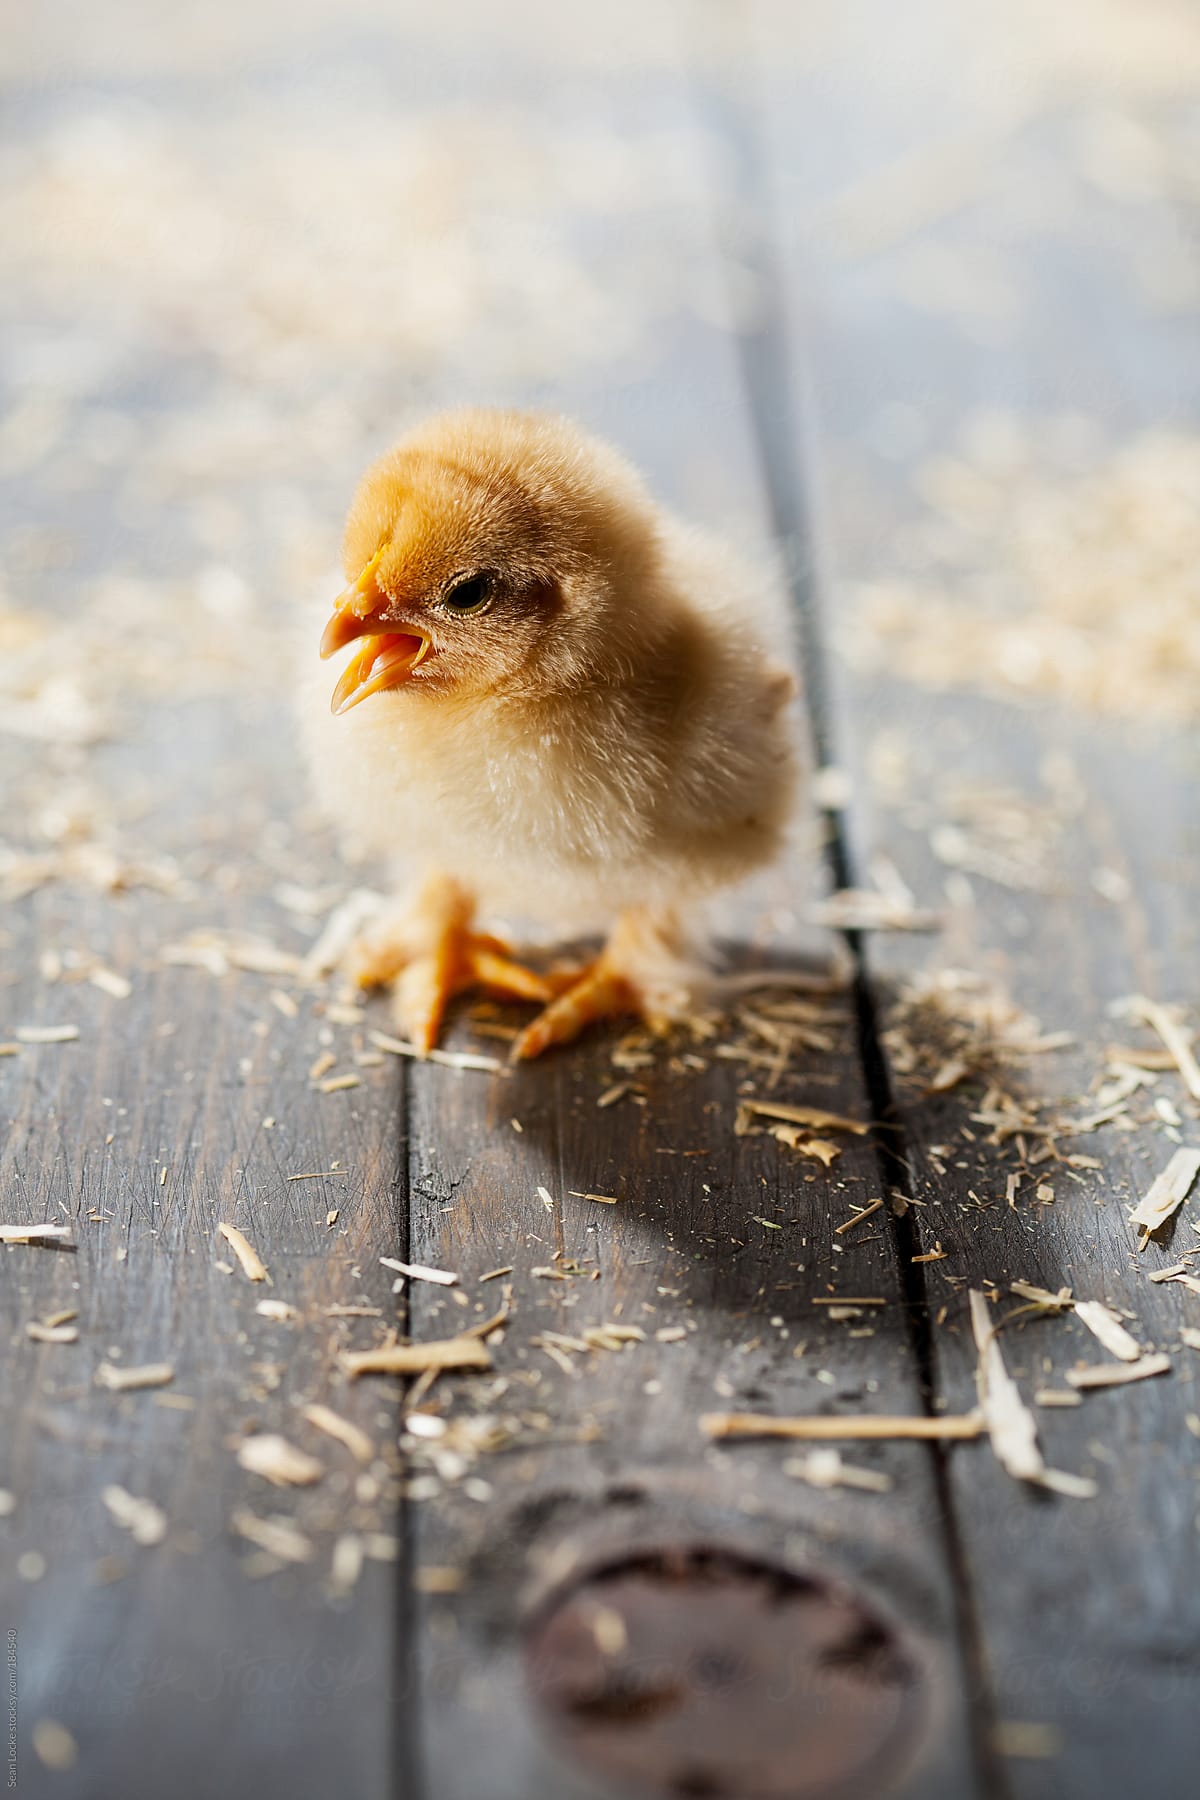 Chicks: Baby Chicken On Wooden Planks with Straw